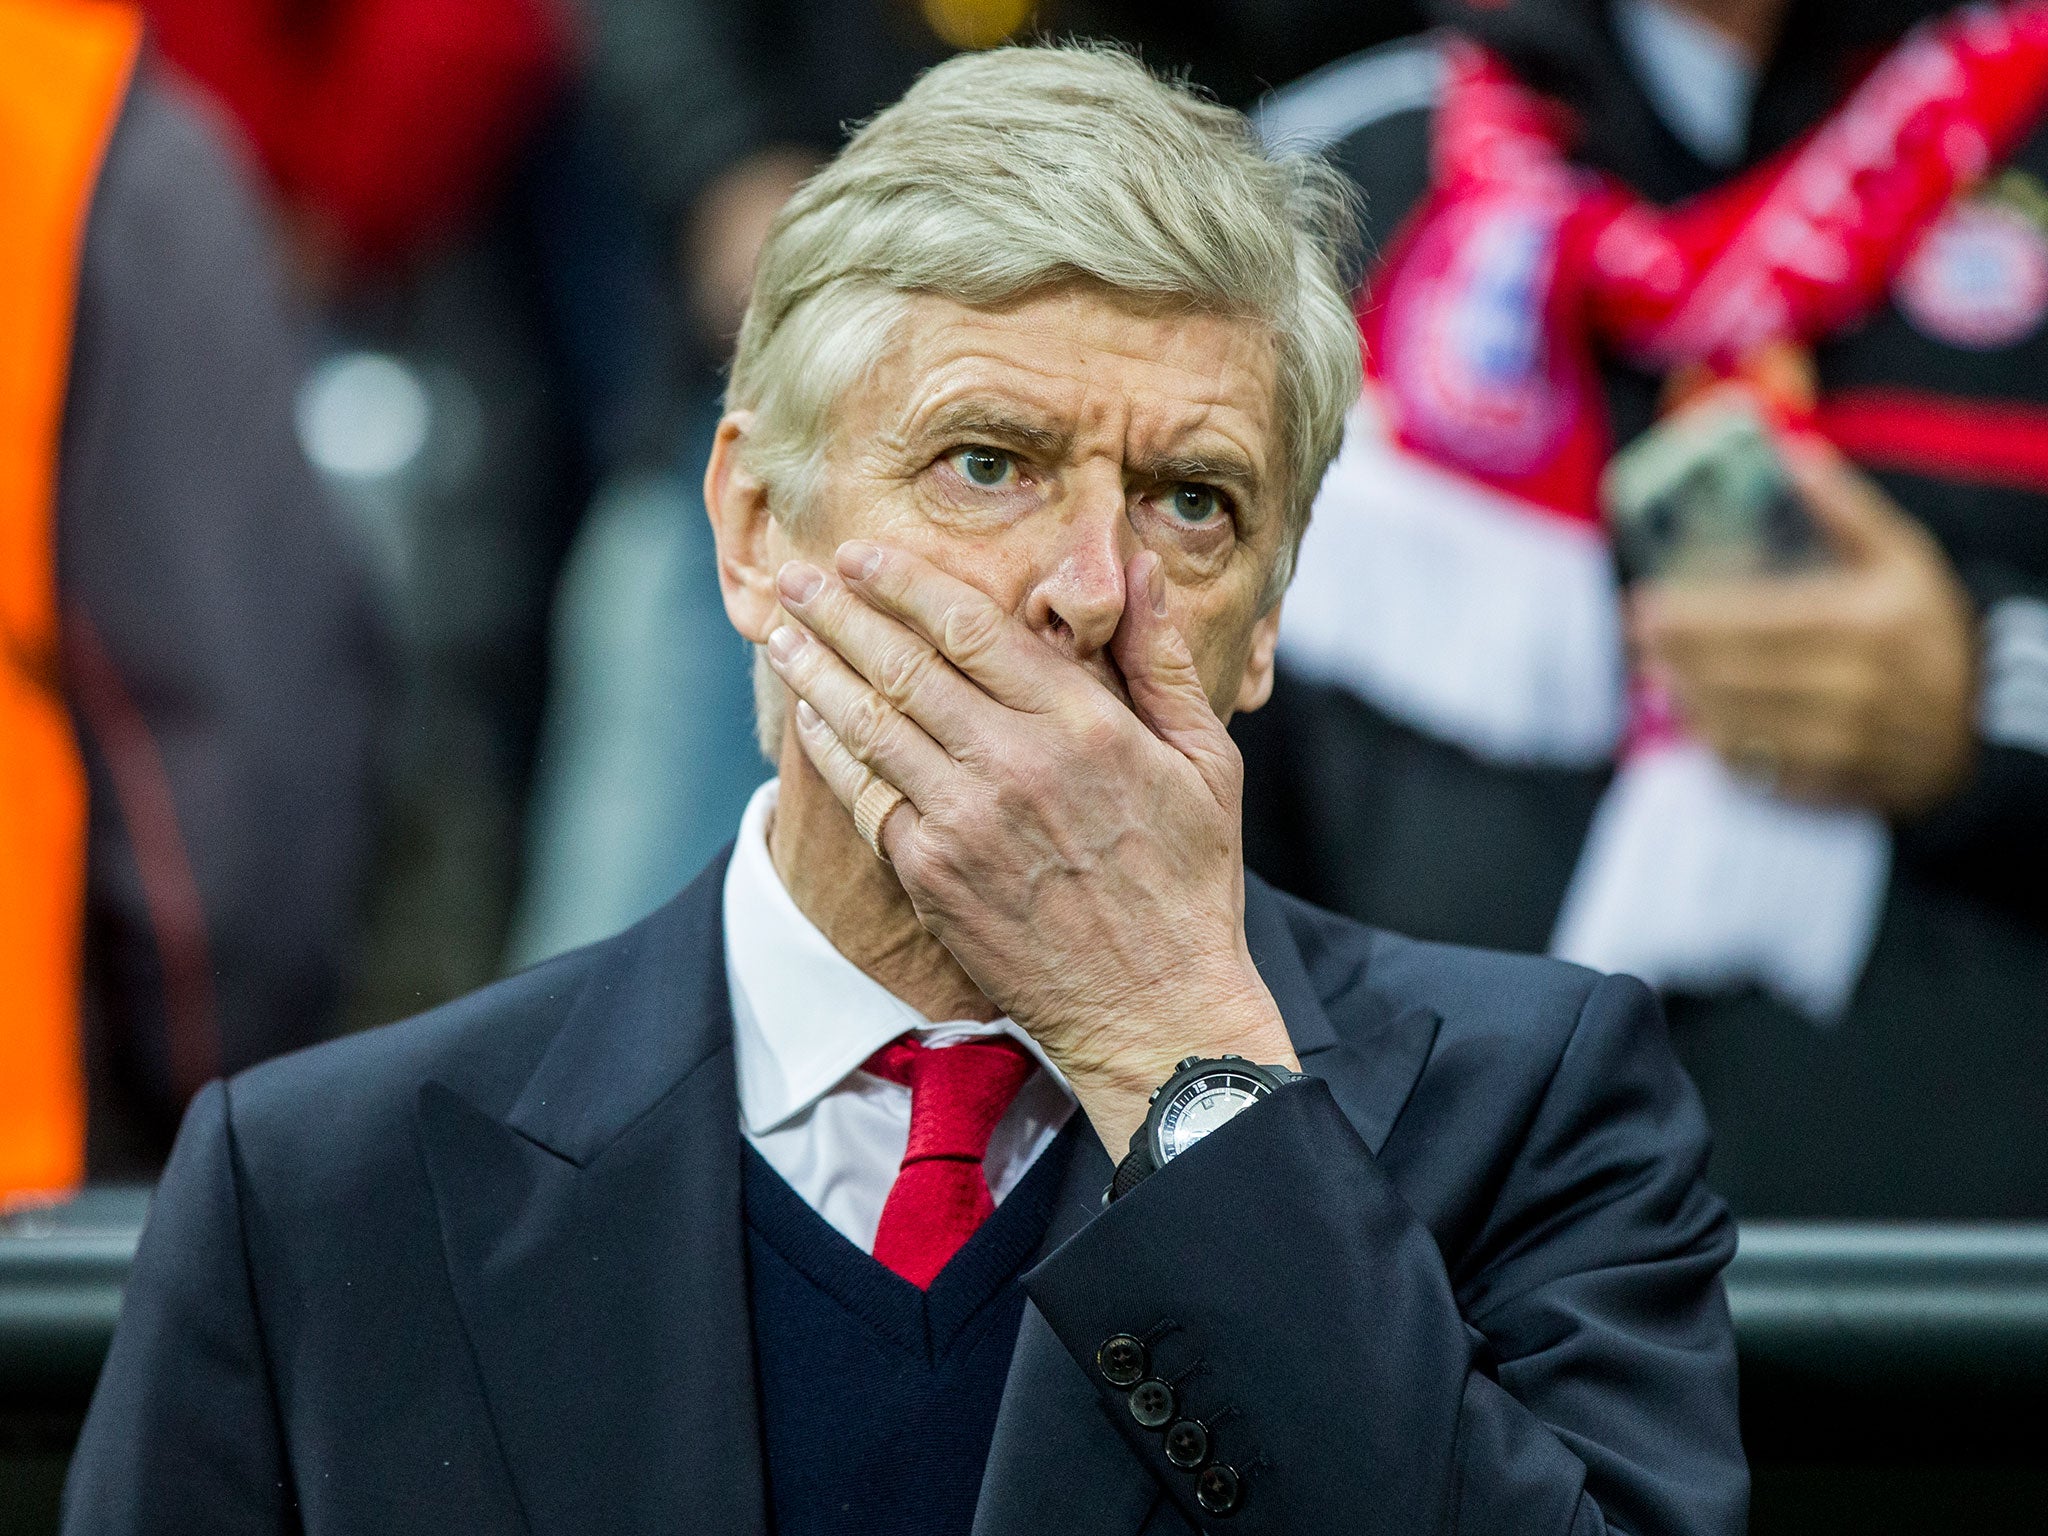 The 5-1 defeat by Bayern Munich now raises the possibility of Arsene Wenger leaving Arsenal